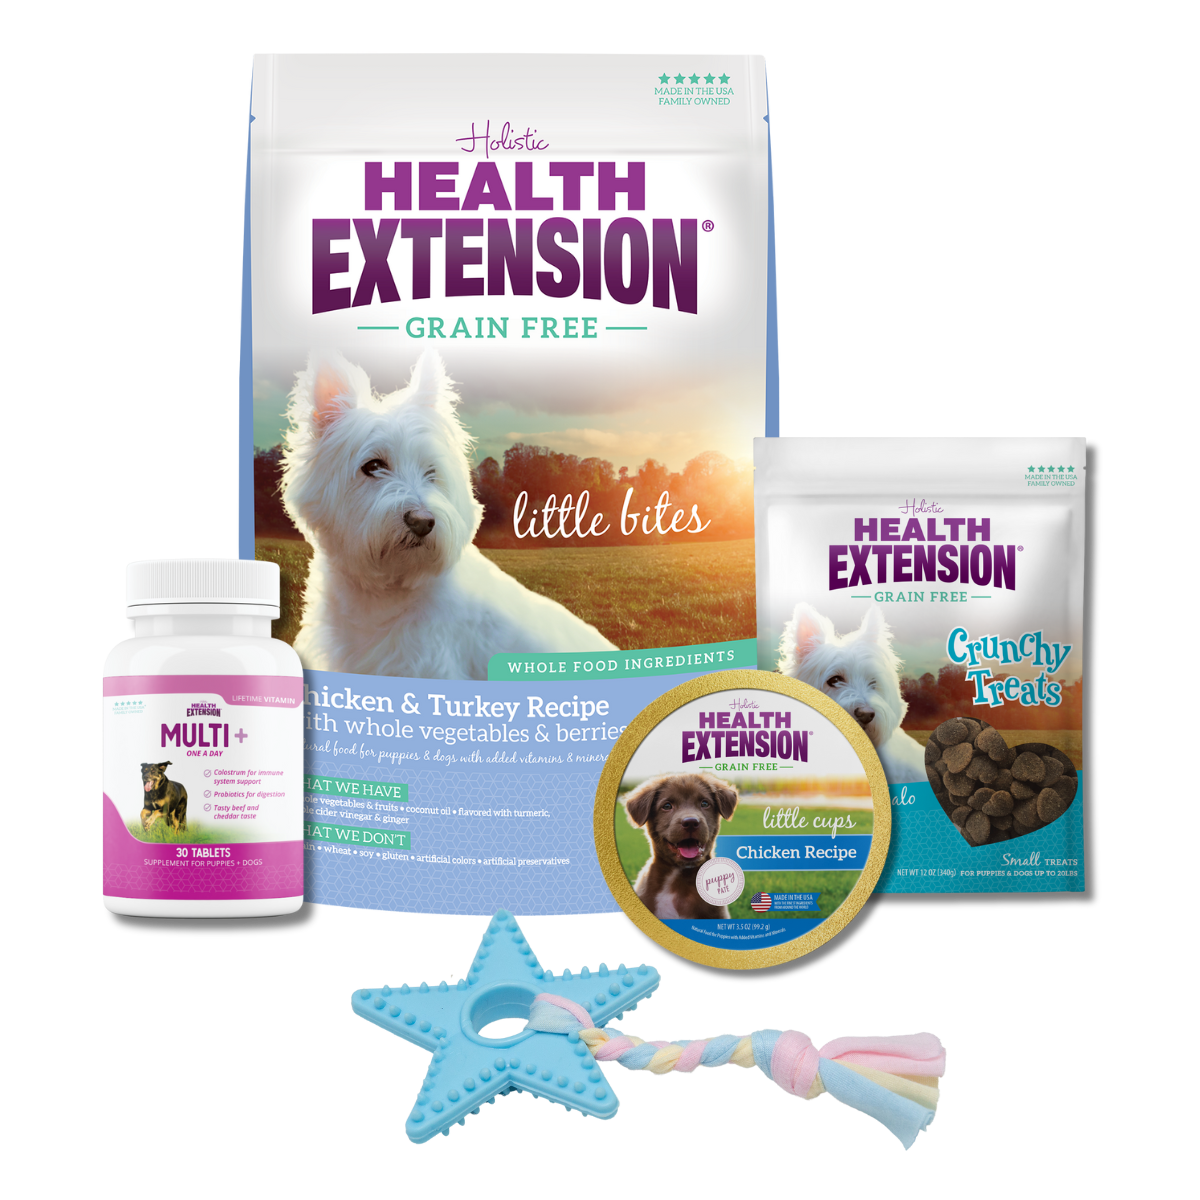 Complete Puppy Bundle: Bag of Health Extension Grain Free Chicken & Turkey Little Bites and variety of other dog products, including food, treats, toys, and supplements.